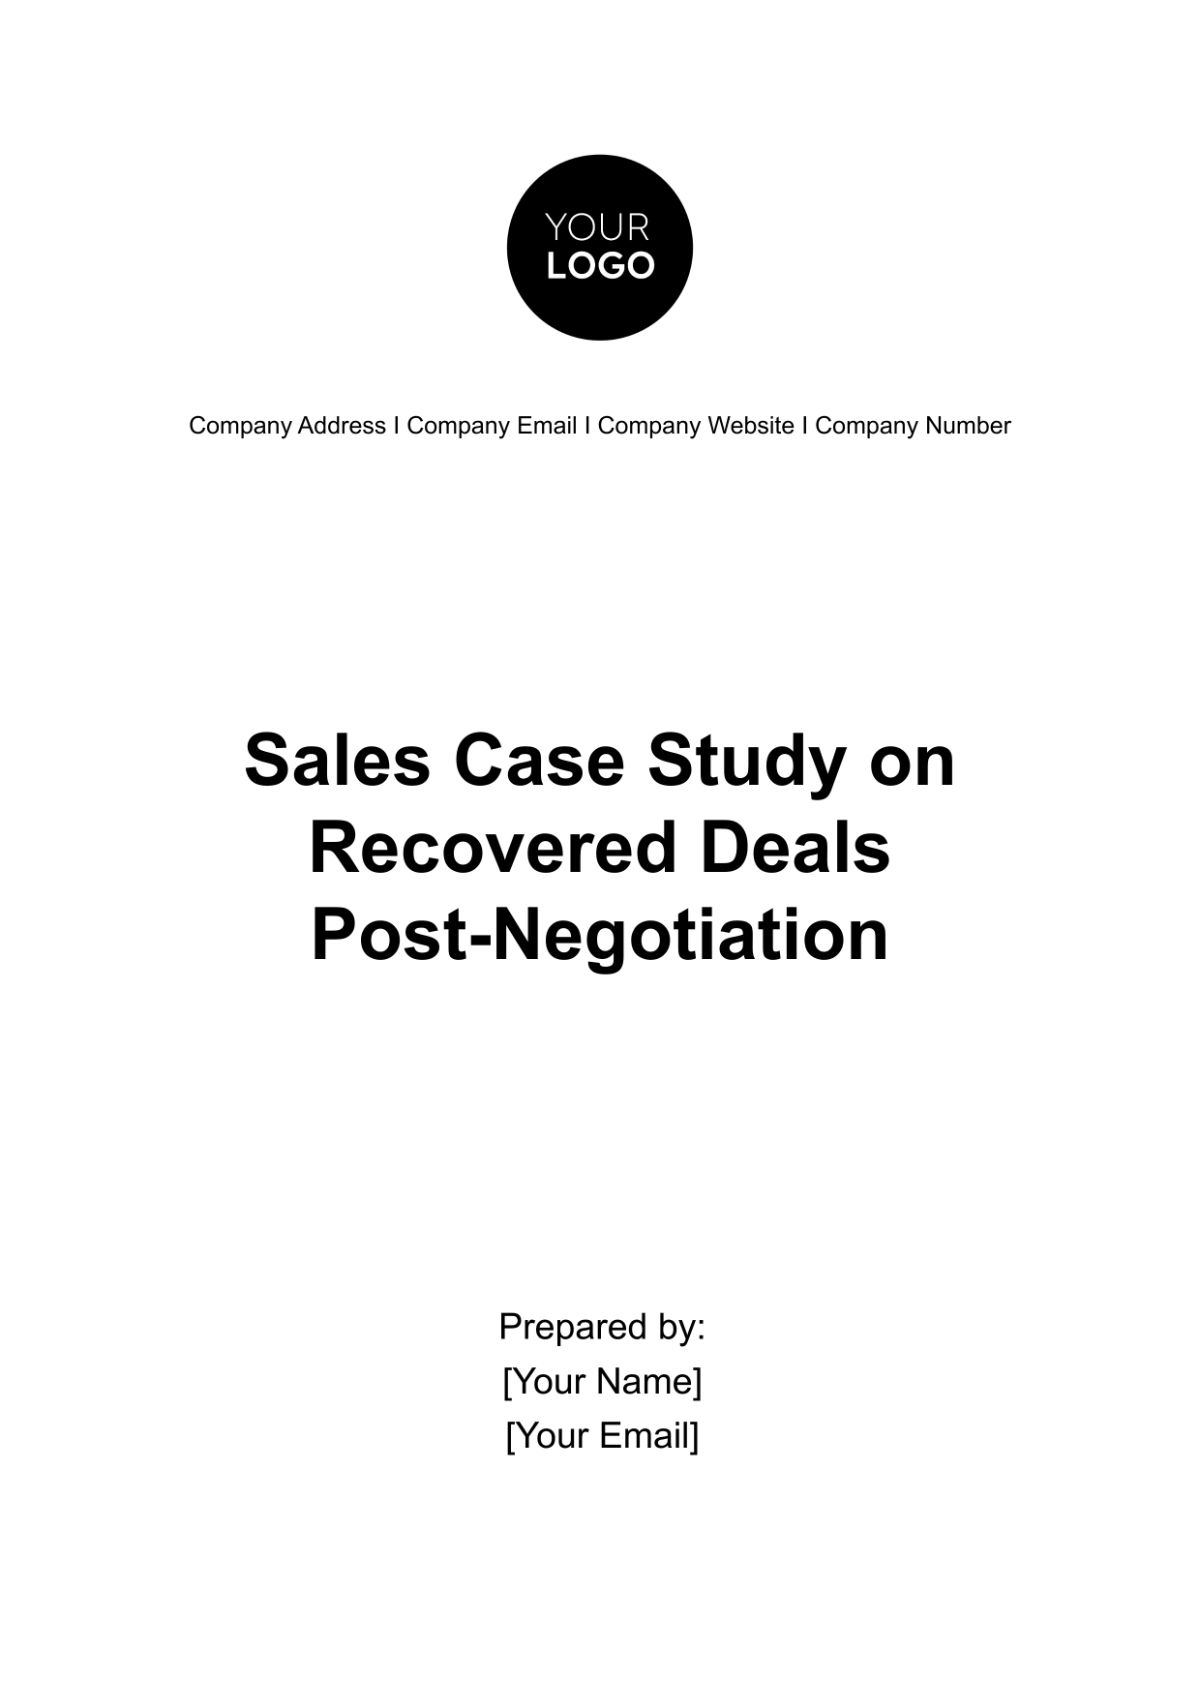 Sales Case Study on Recovered Deals Post-Negotiation Template